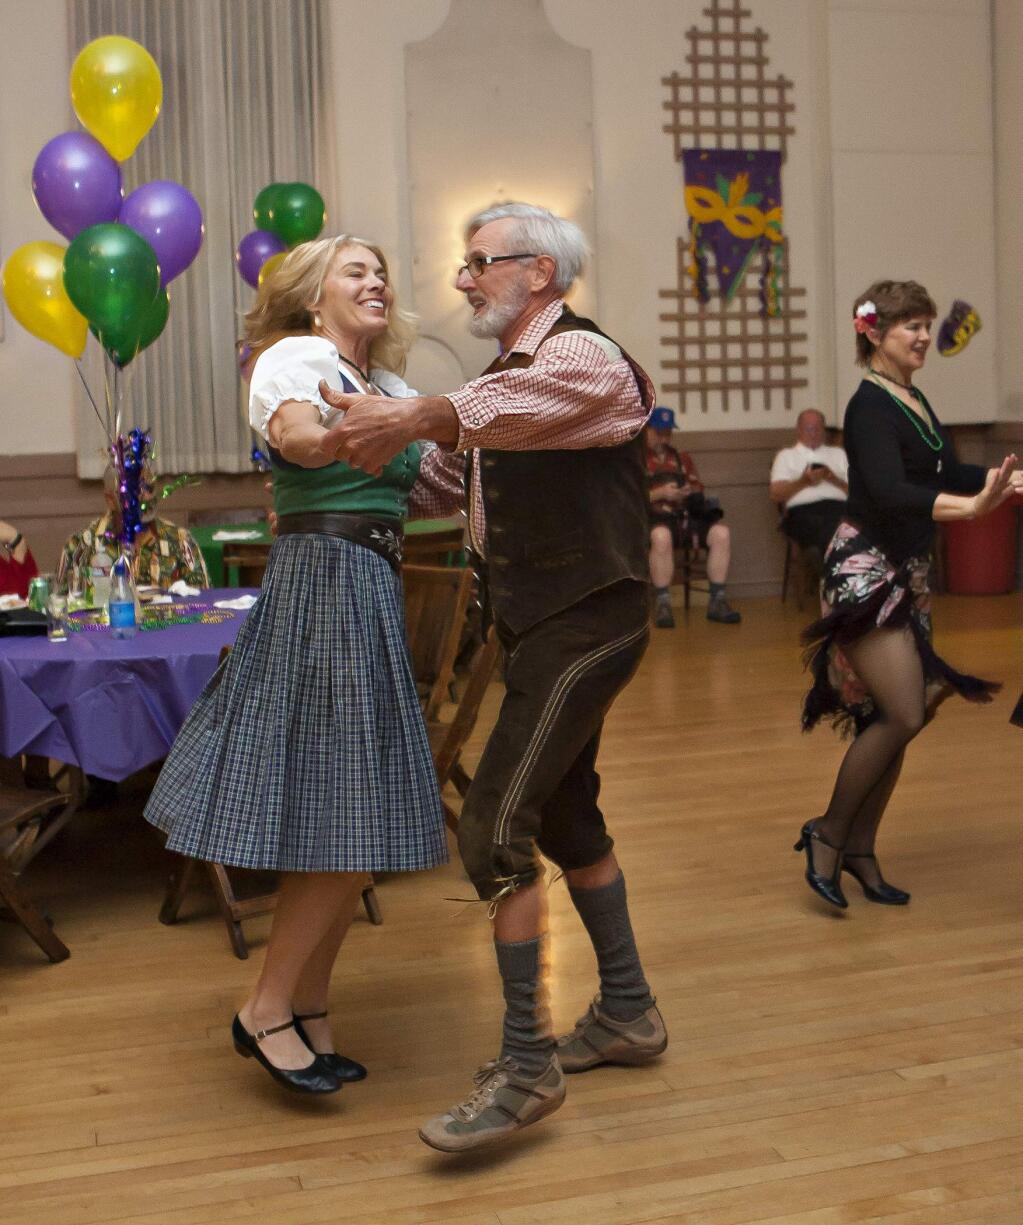 Julie and Will Uhen of San Leandro at Karneval Mardi Gras Costume Ball Fasching At Hermann Sons of Petaluma on Saturday January 31, 2015 (JOHN O'HARA/FOR THE ARGUS-COURIER)